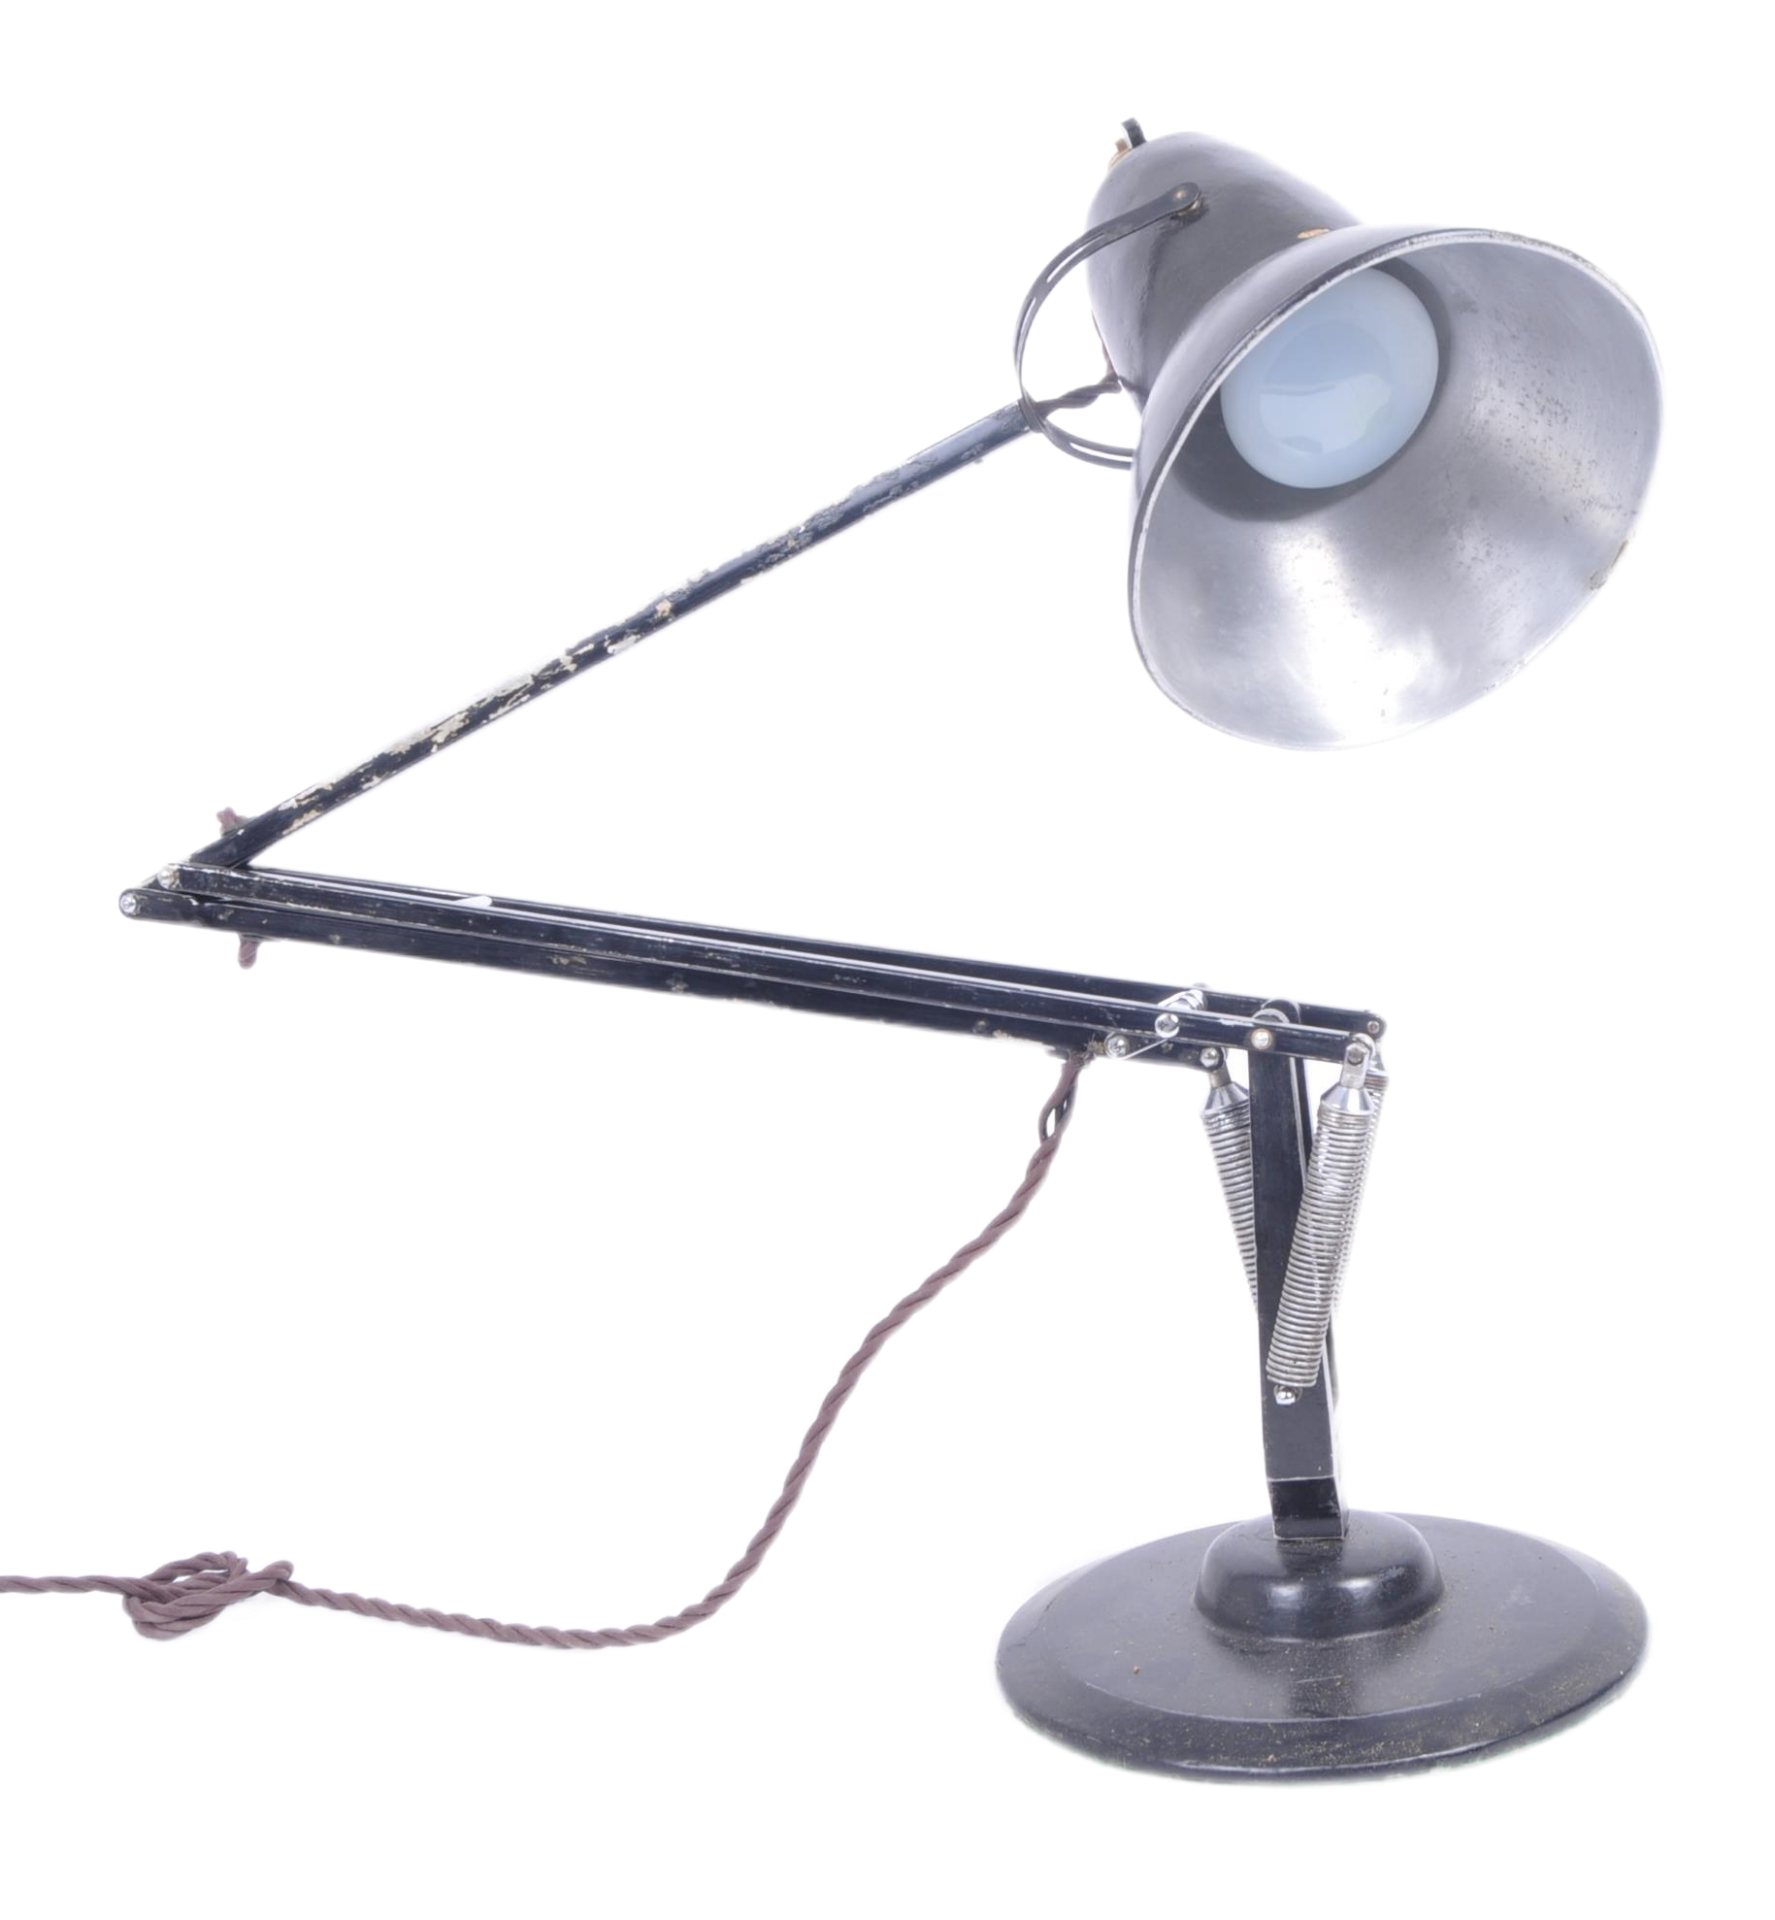 HERBERT TERRY - EARLY BLACK ANGLEPOISE LAMP ON ROUND BASE